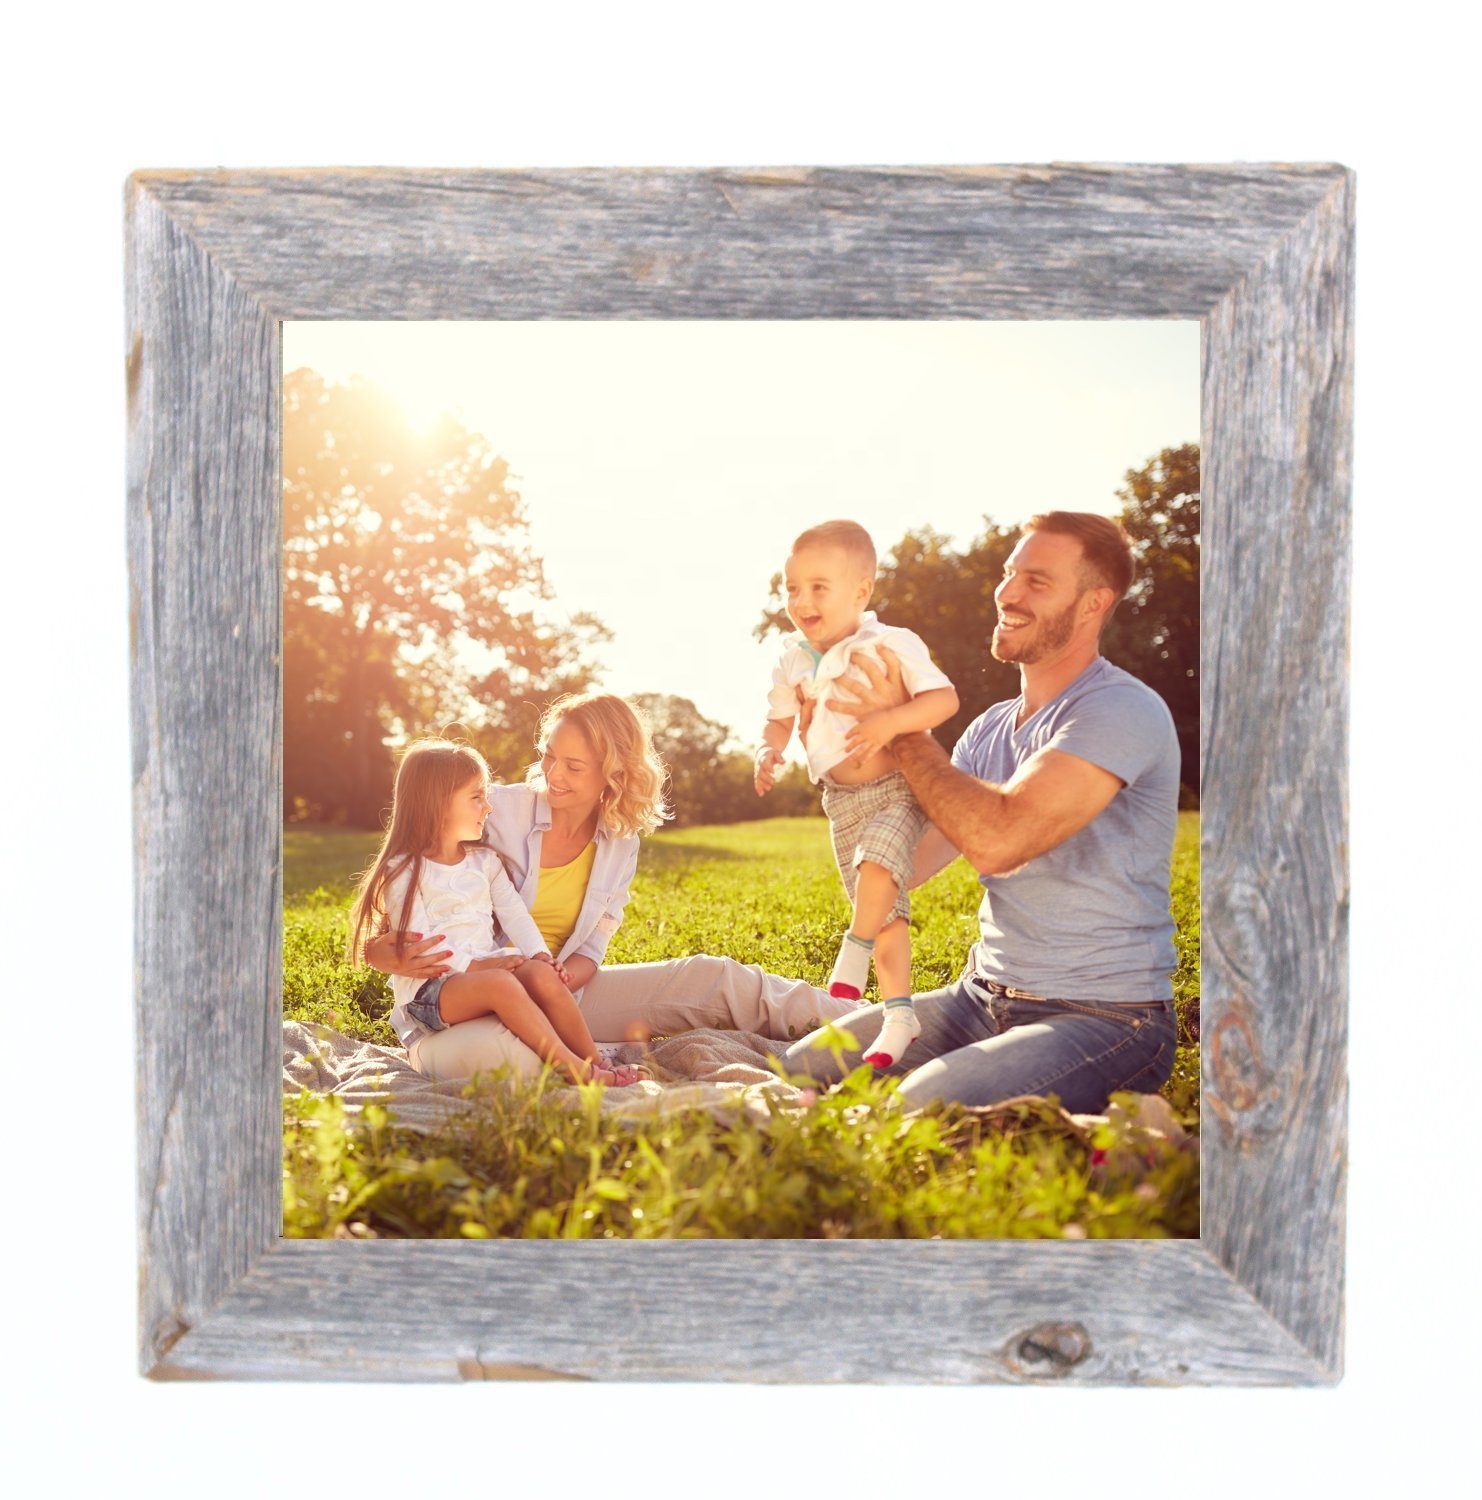 High quality decoration classic wooden picture frame country style environment friendly photo frames